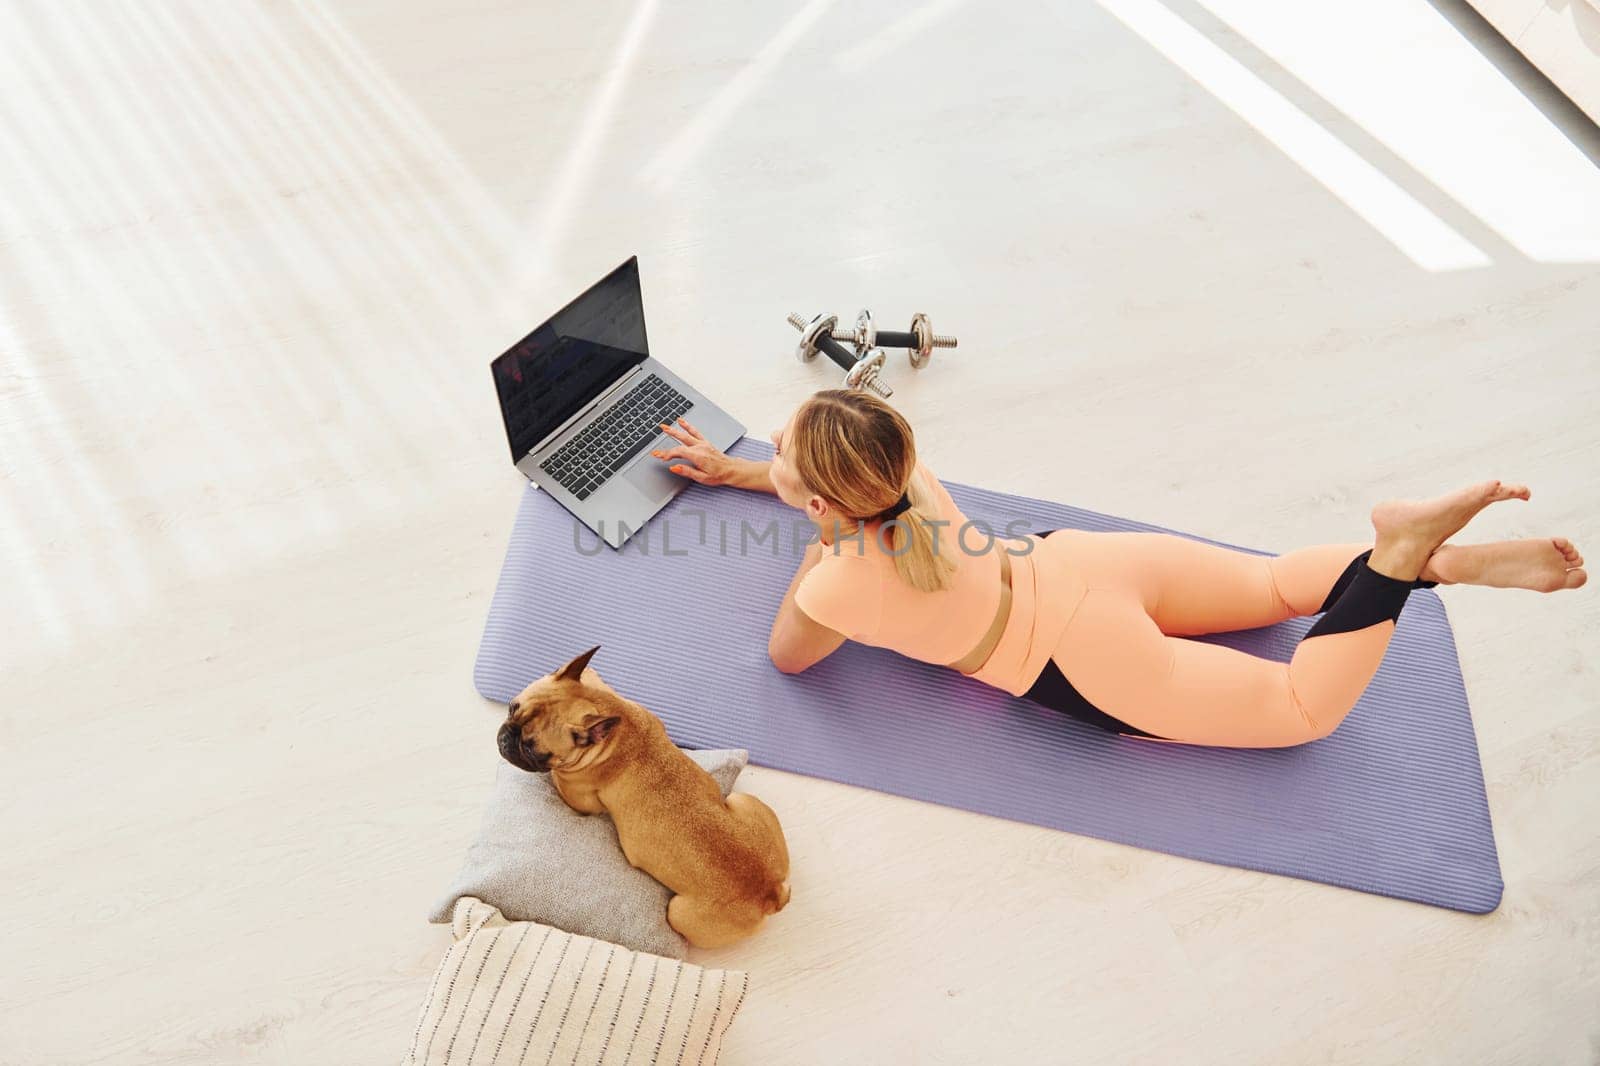 Top view of woman with pug dog and laptop that is at home at daytime.